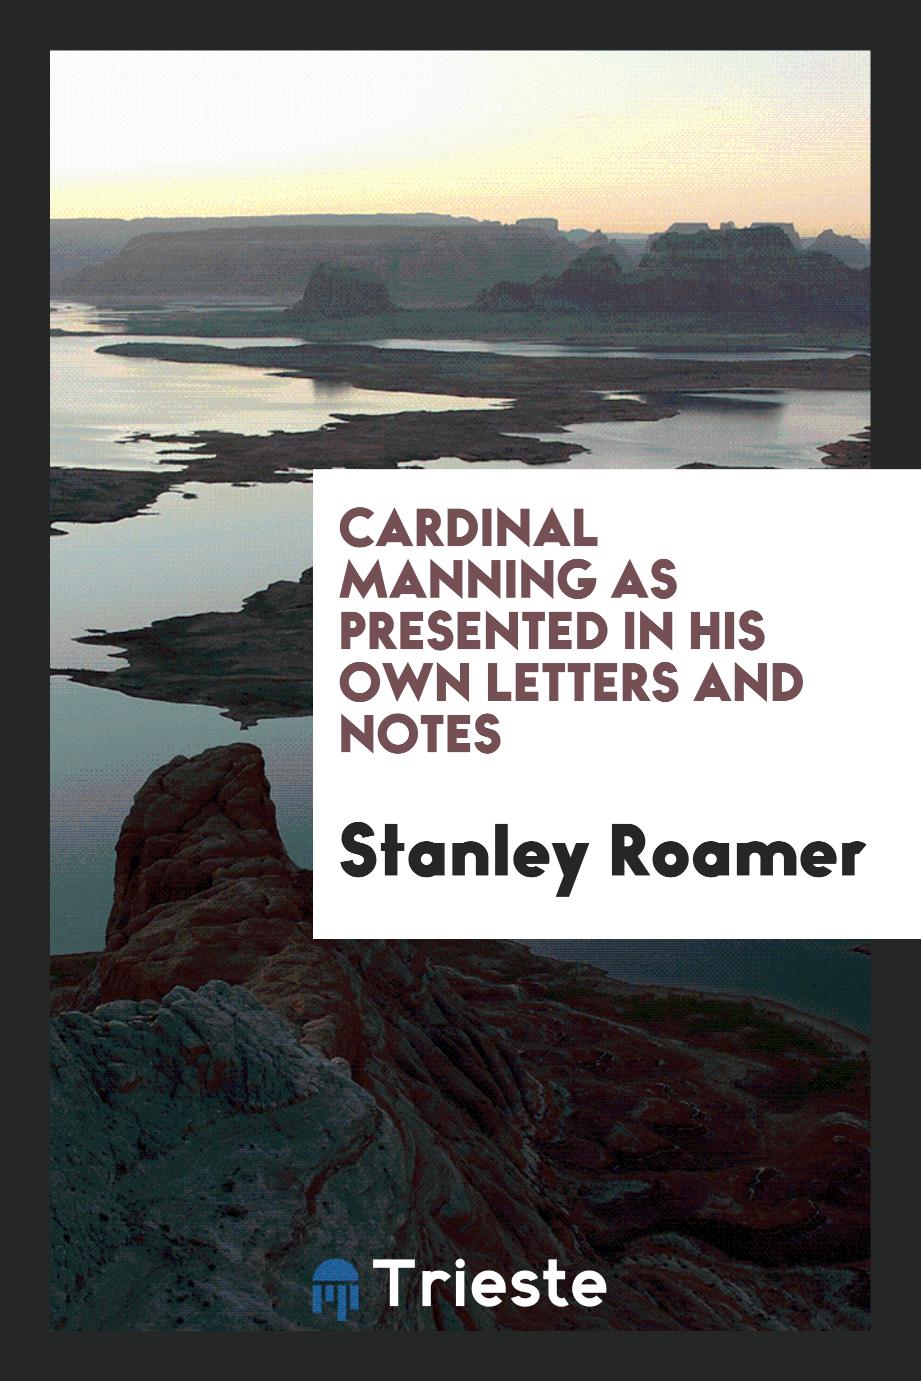 Cardinal Manning as presented in his own letters and notes